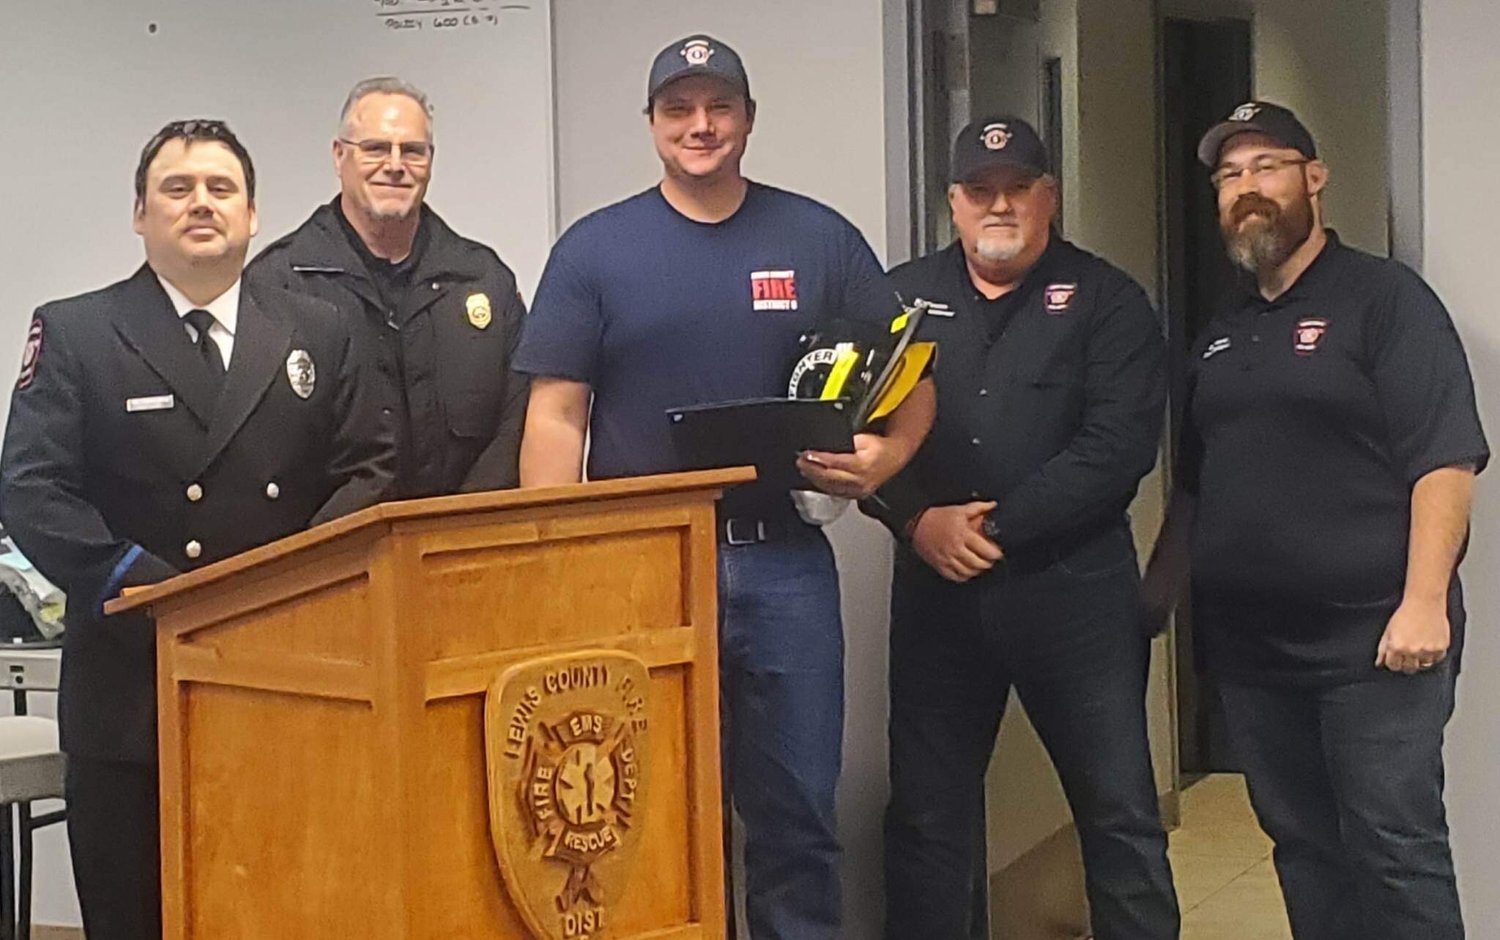 Recruit Graduate Pete Harris receiving his certificate, helmet, and challenge coin. From left, firefighter Mike Goodwillie, Fire Chief Ken Cardinale, Harris, Board Chair Colin Mason and Commissioner Greg Greene.